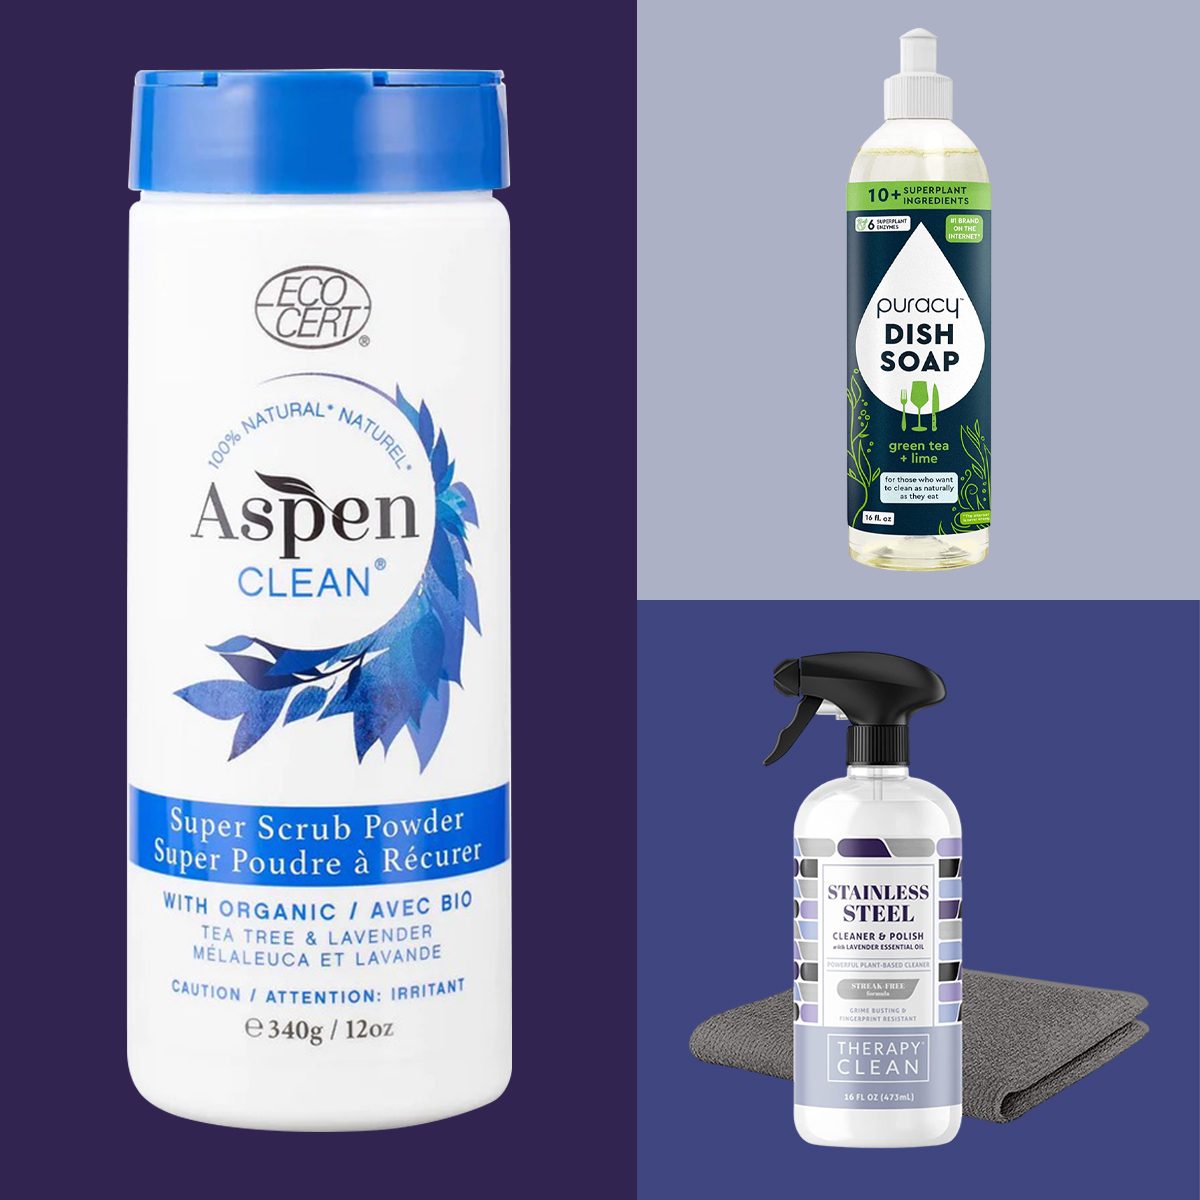 The Best Natural Cleaning Products in 2020 - Non-Toxic Cleaning